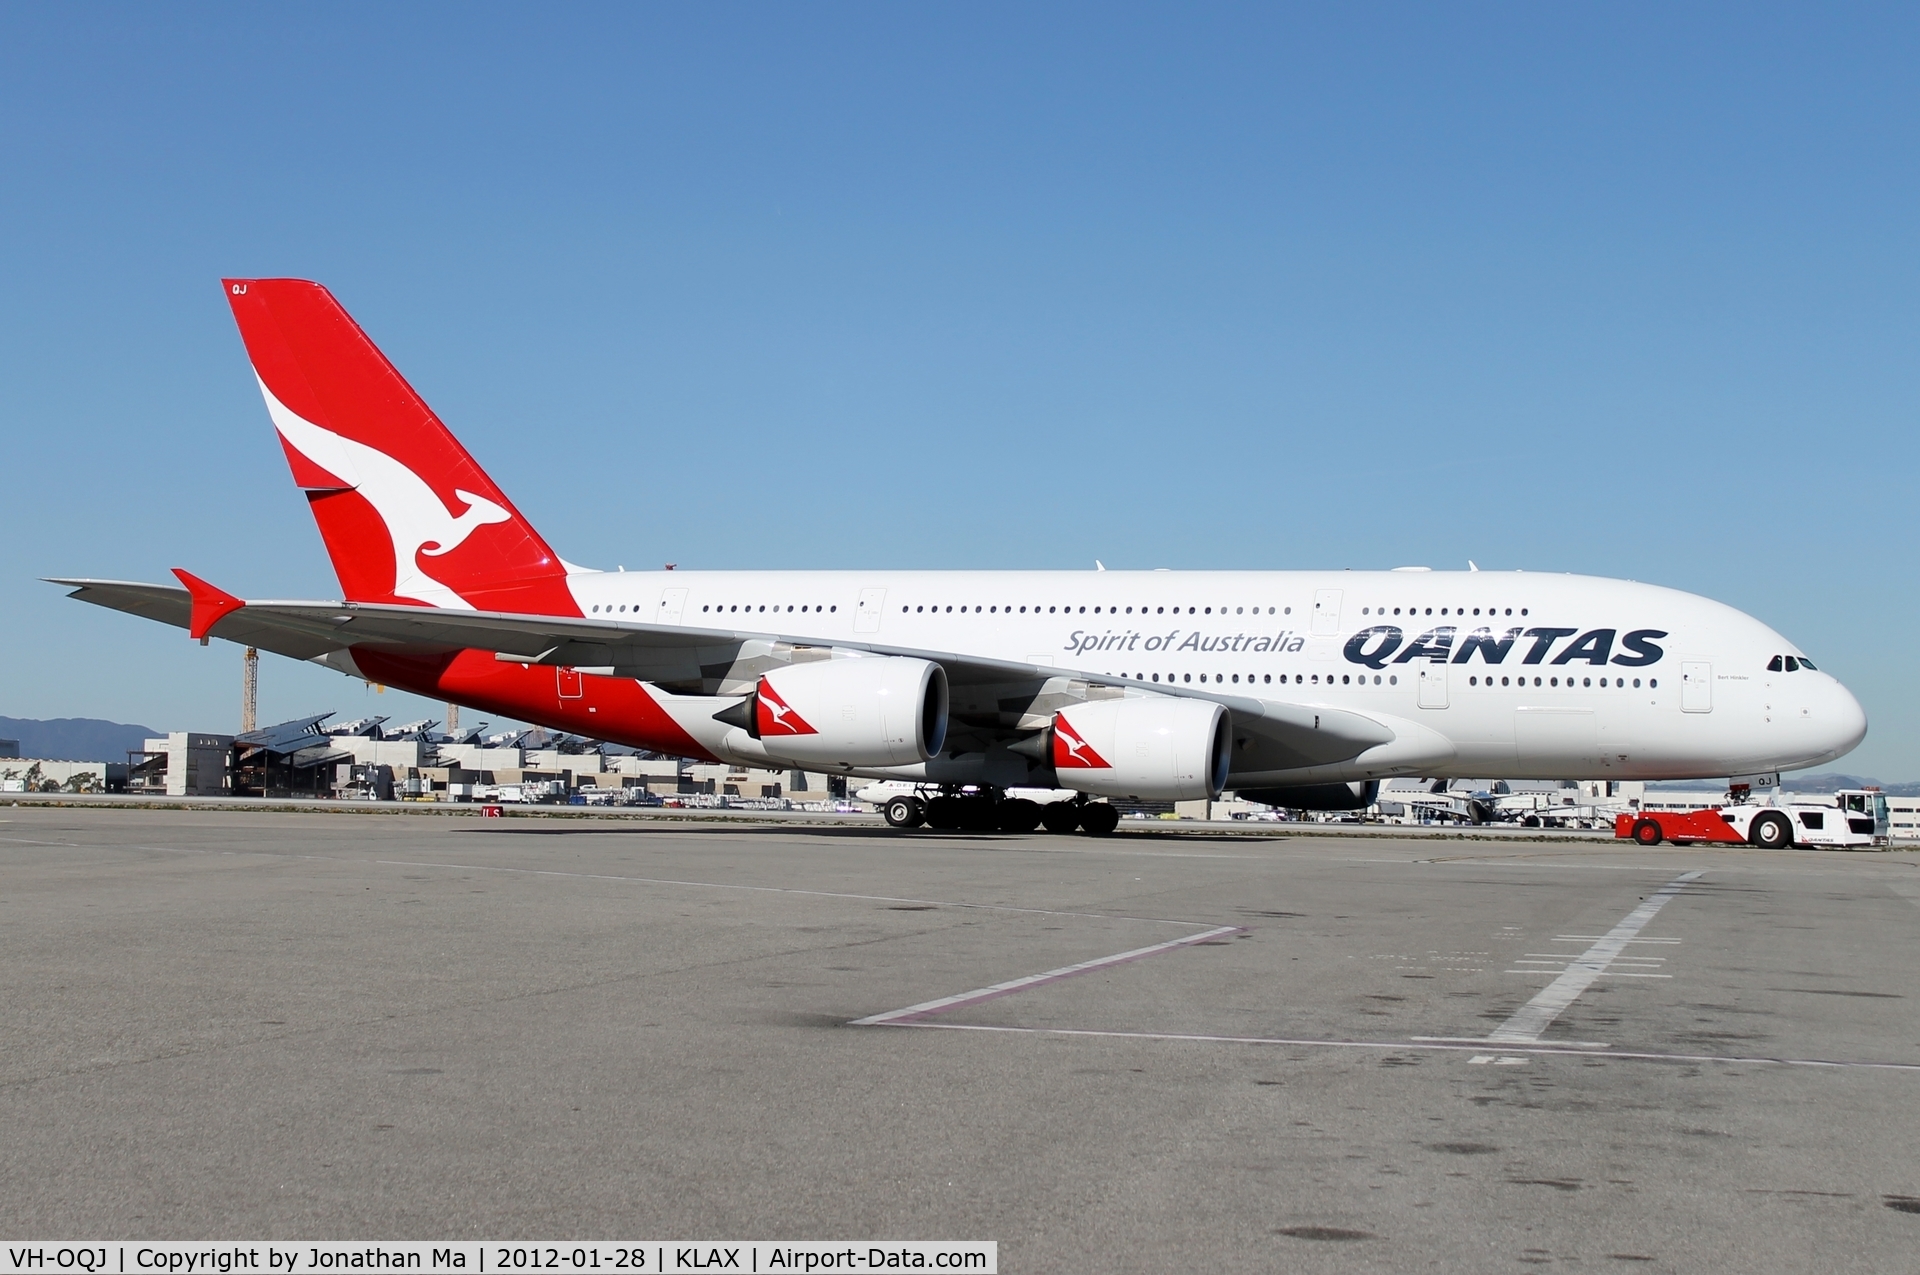 VH-OQJ, 2010 Airbus A380-842 C/N 062, Qantas A380 parked at the Flight Path Museum for a private event